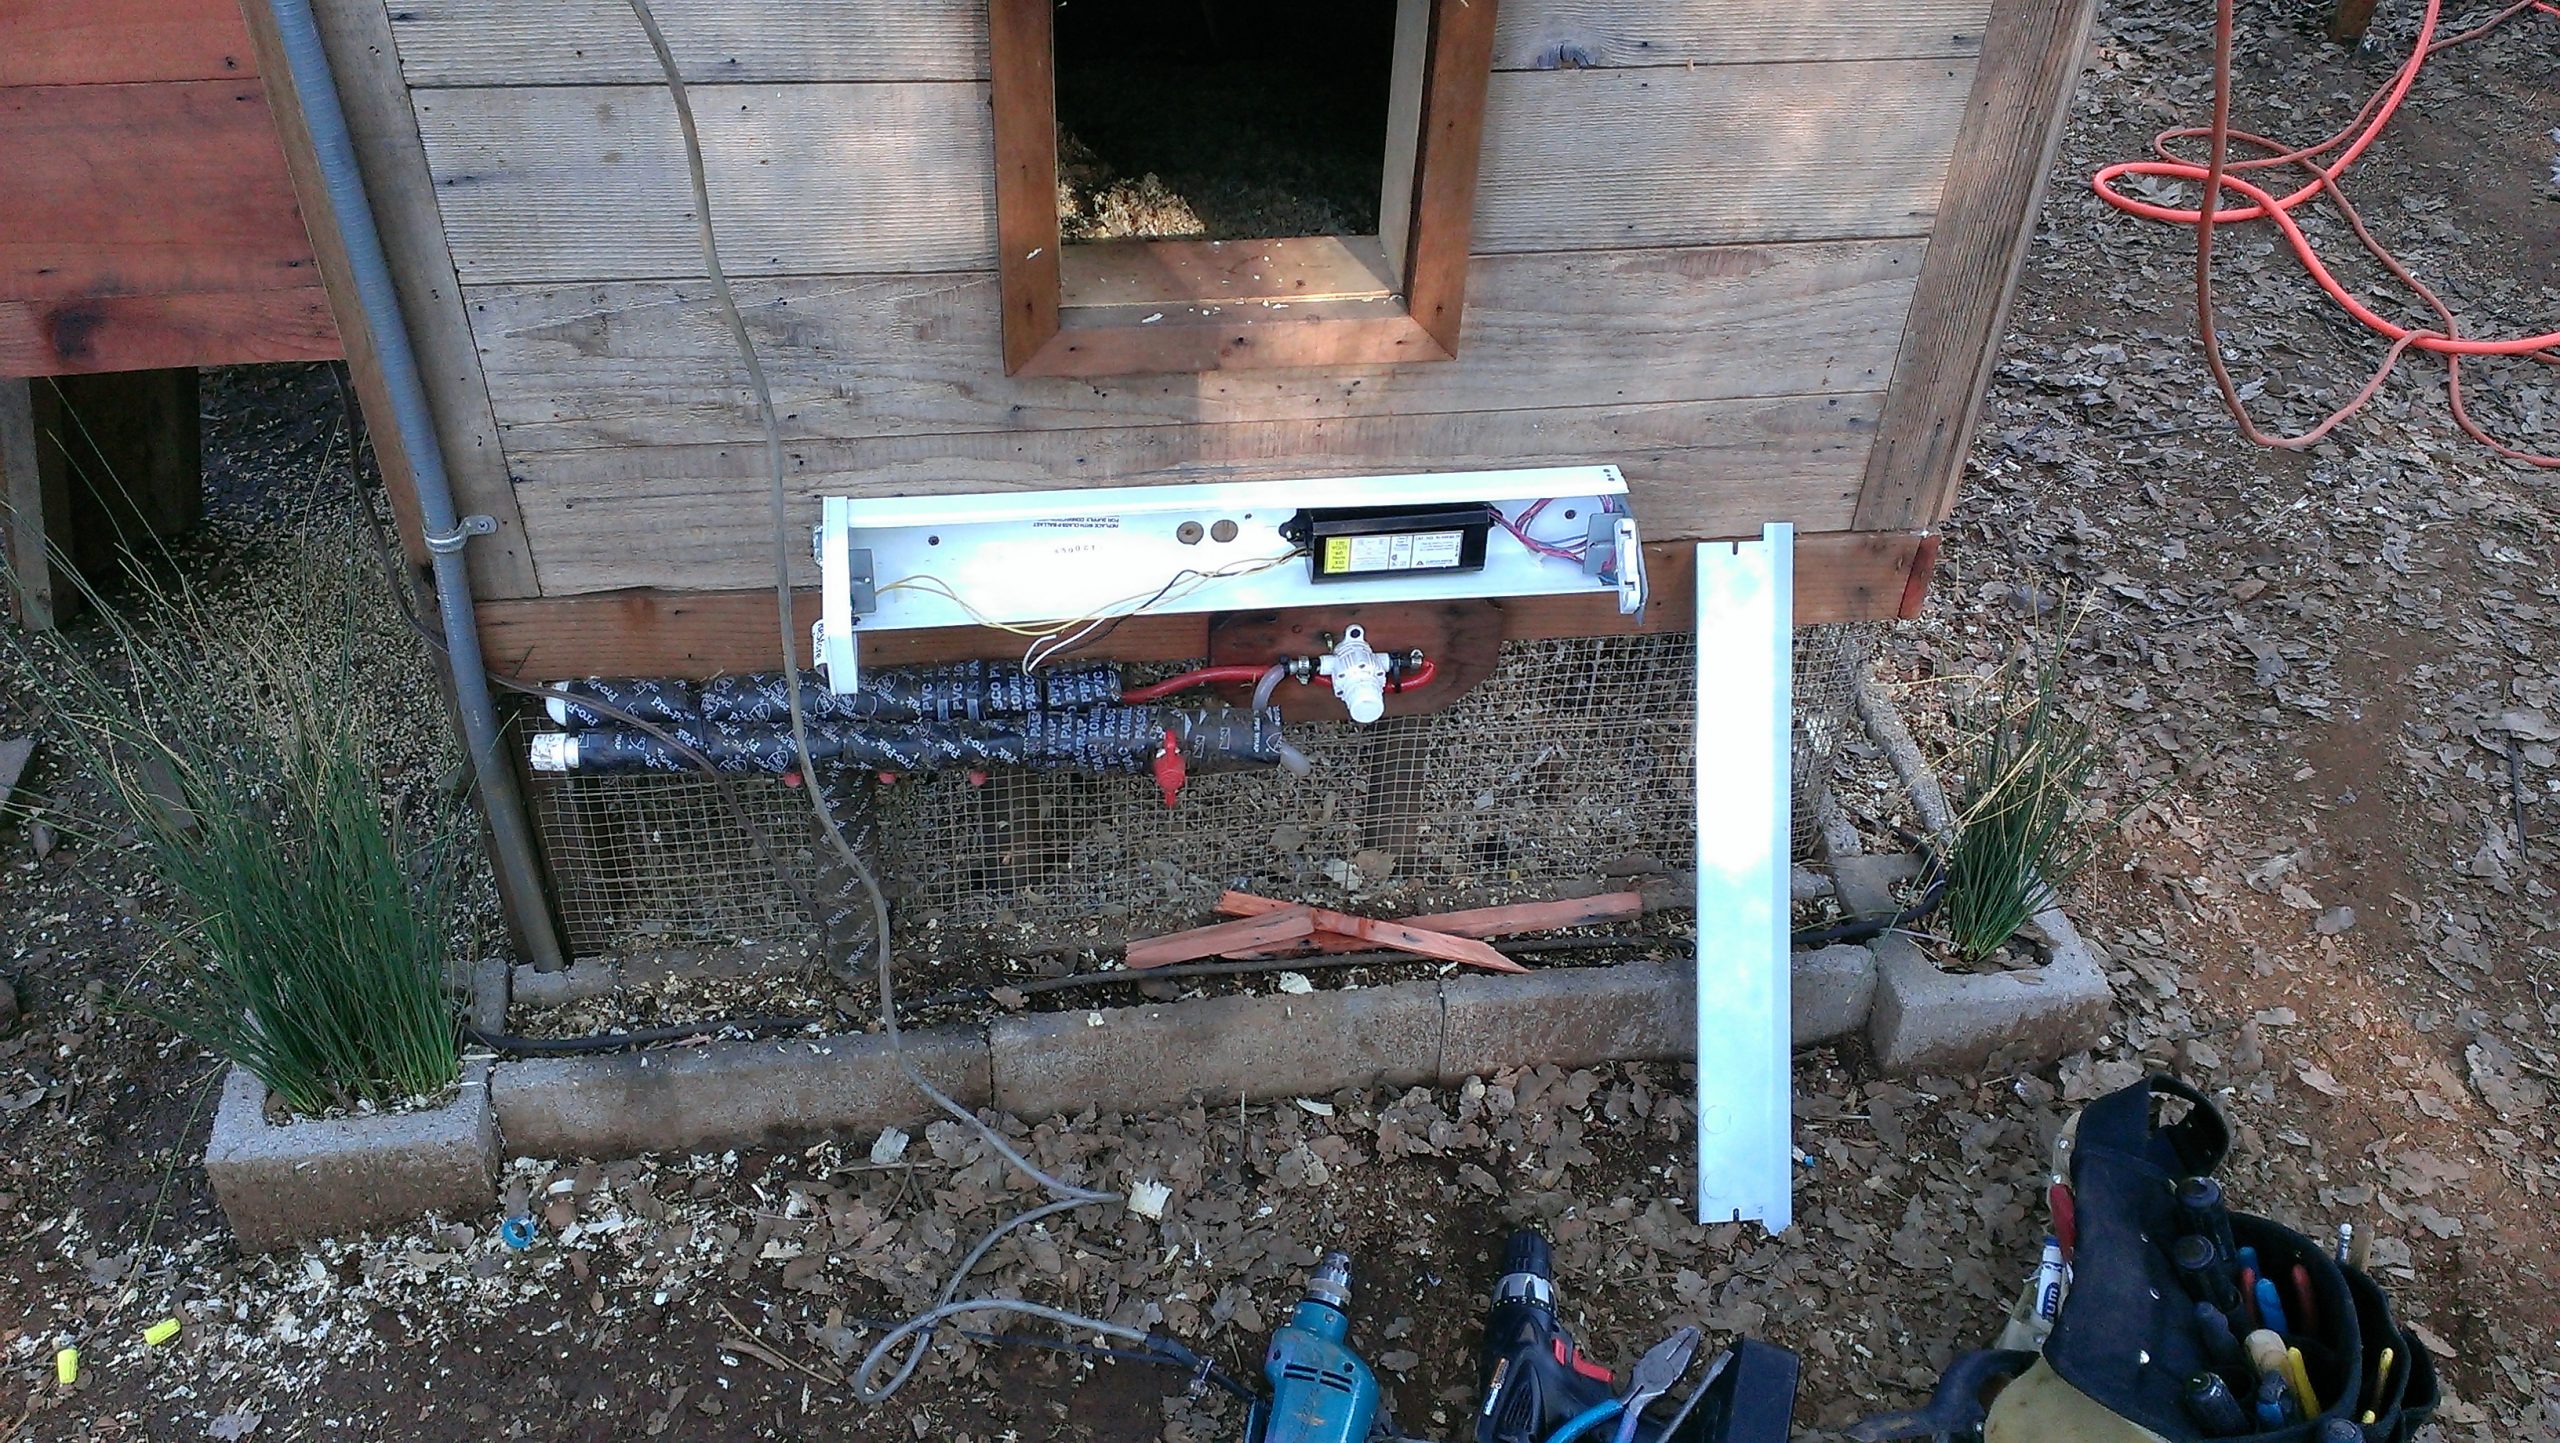 Wiring Chicken Coop Heater (shop light with cover off) - Exterior Pipe Protection (mounted under stairs and above wrapped pipe)